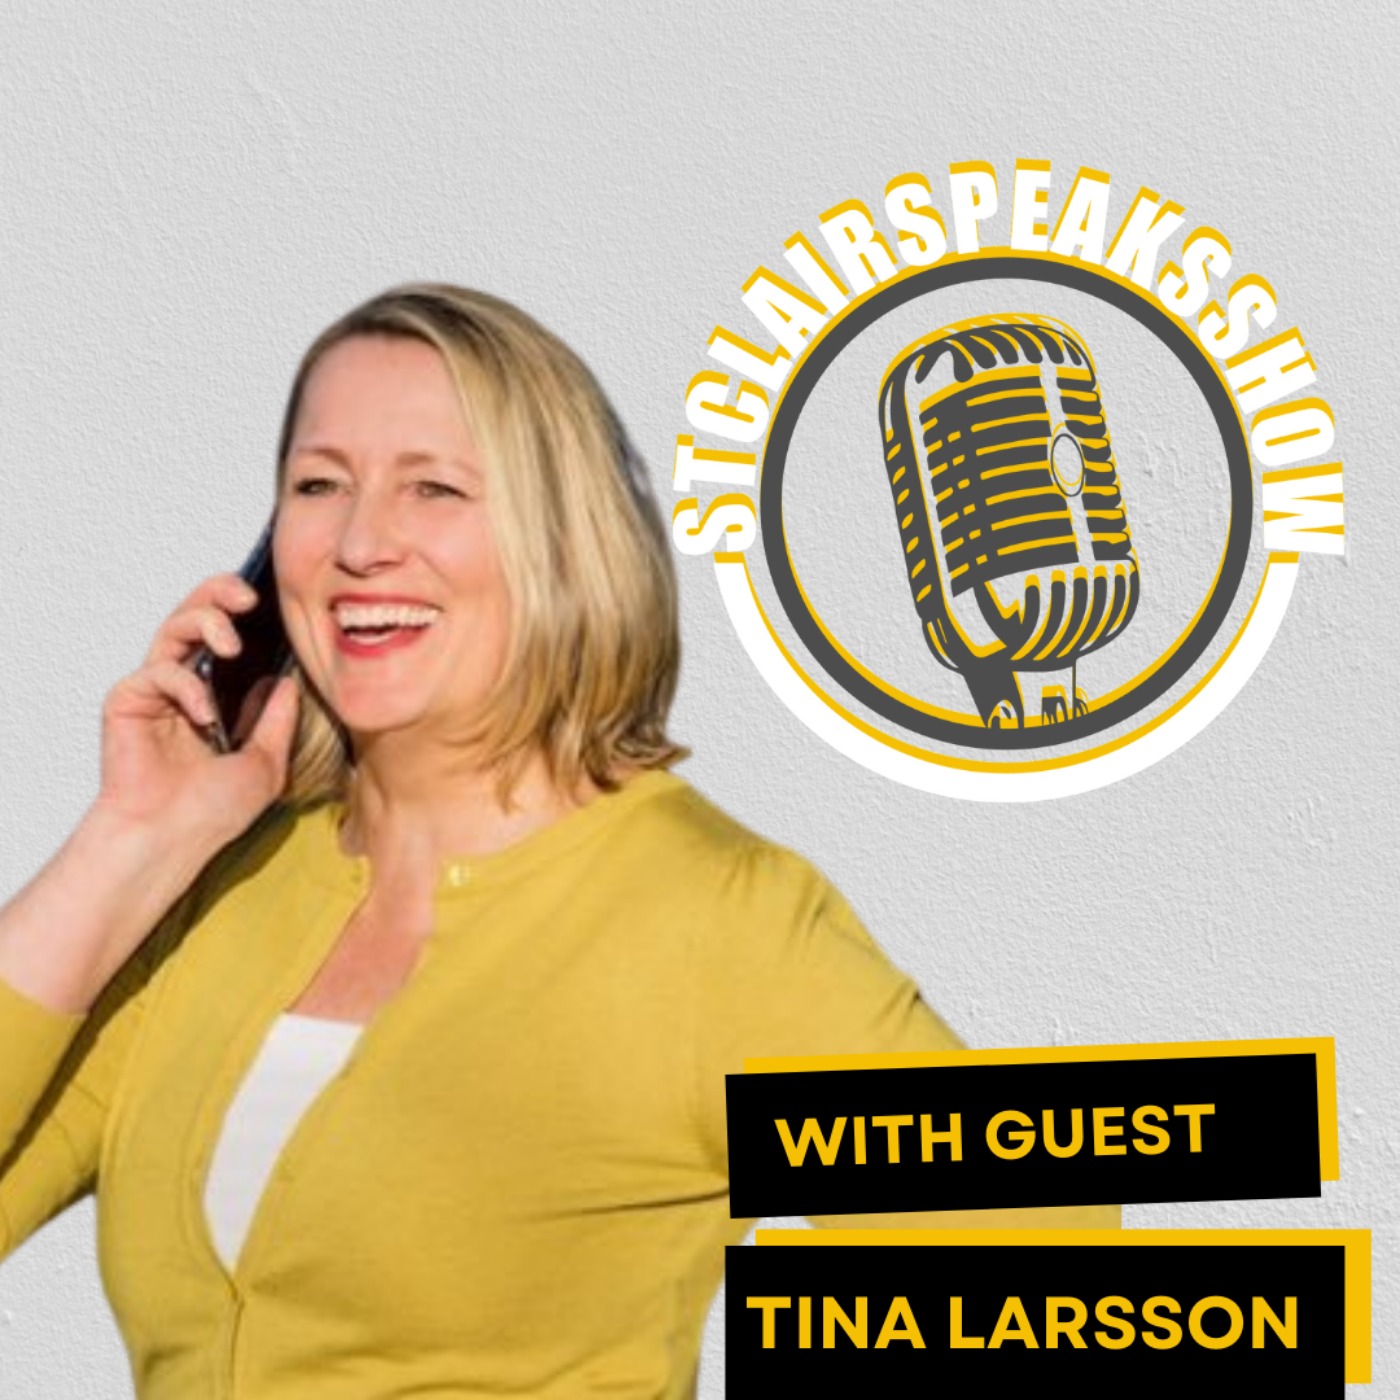 The StclairSpeaksShow Podcast with Tina Larsson - Sustainability & Reactive To Proactive Organization Image